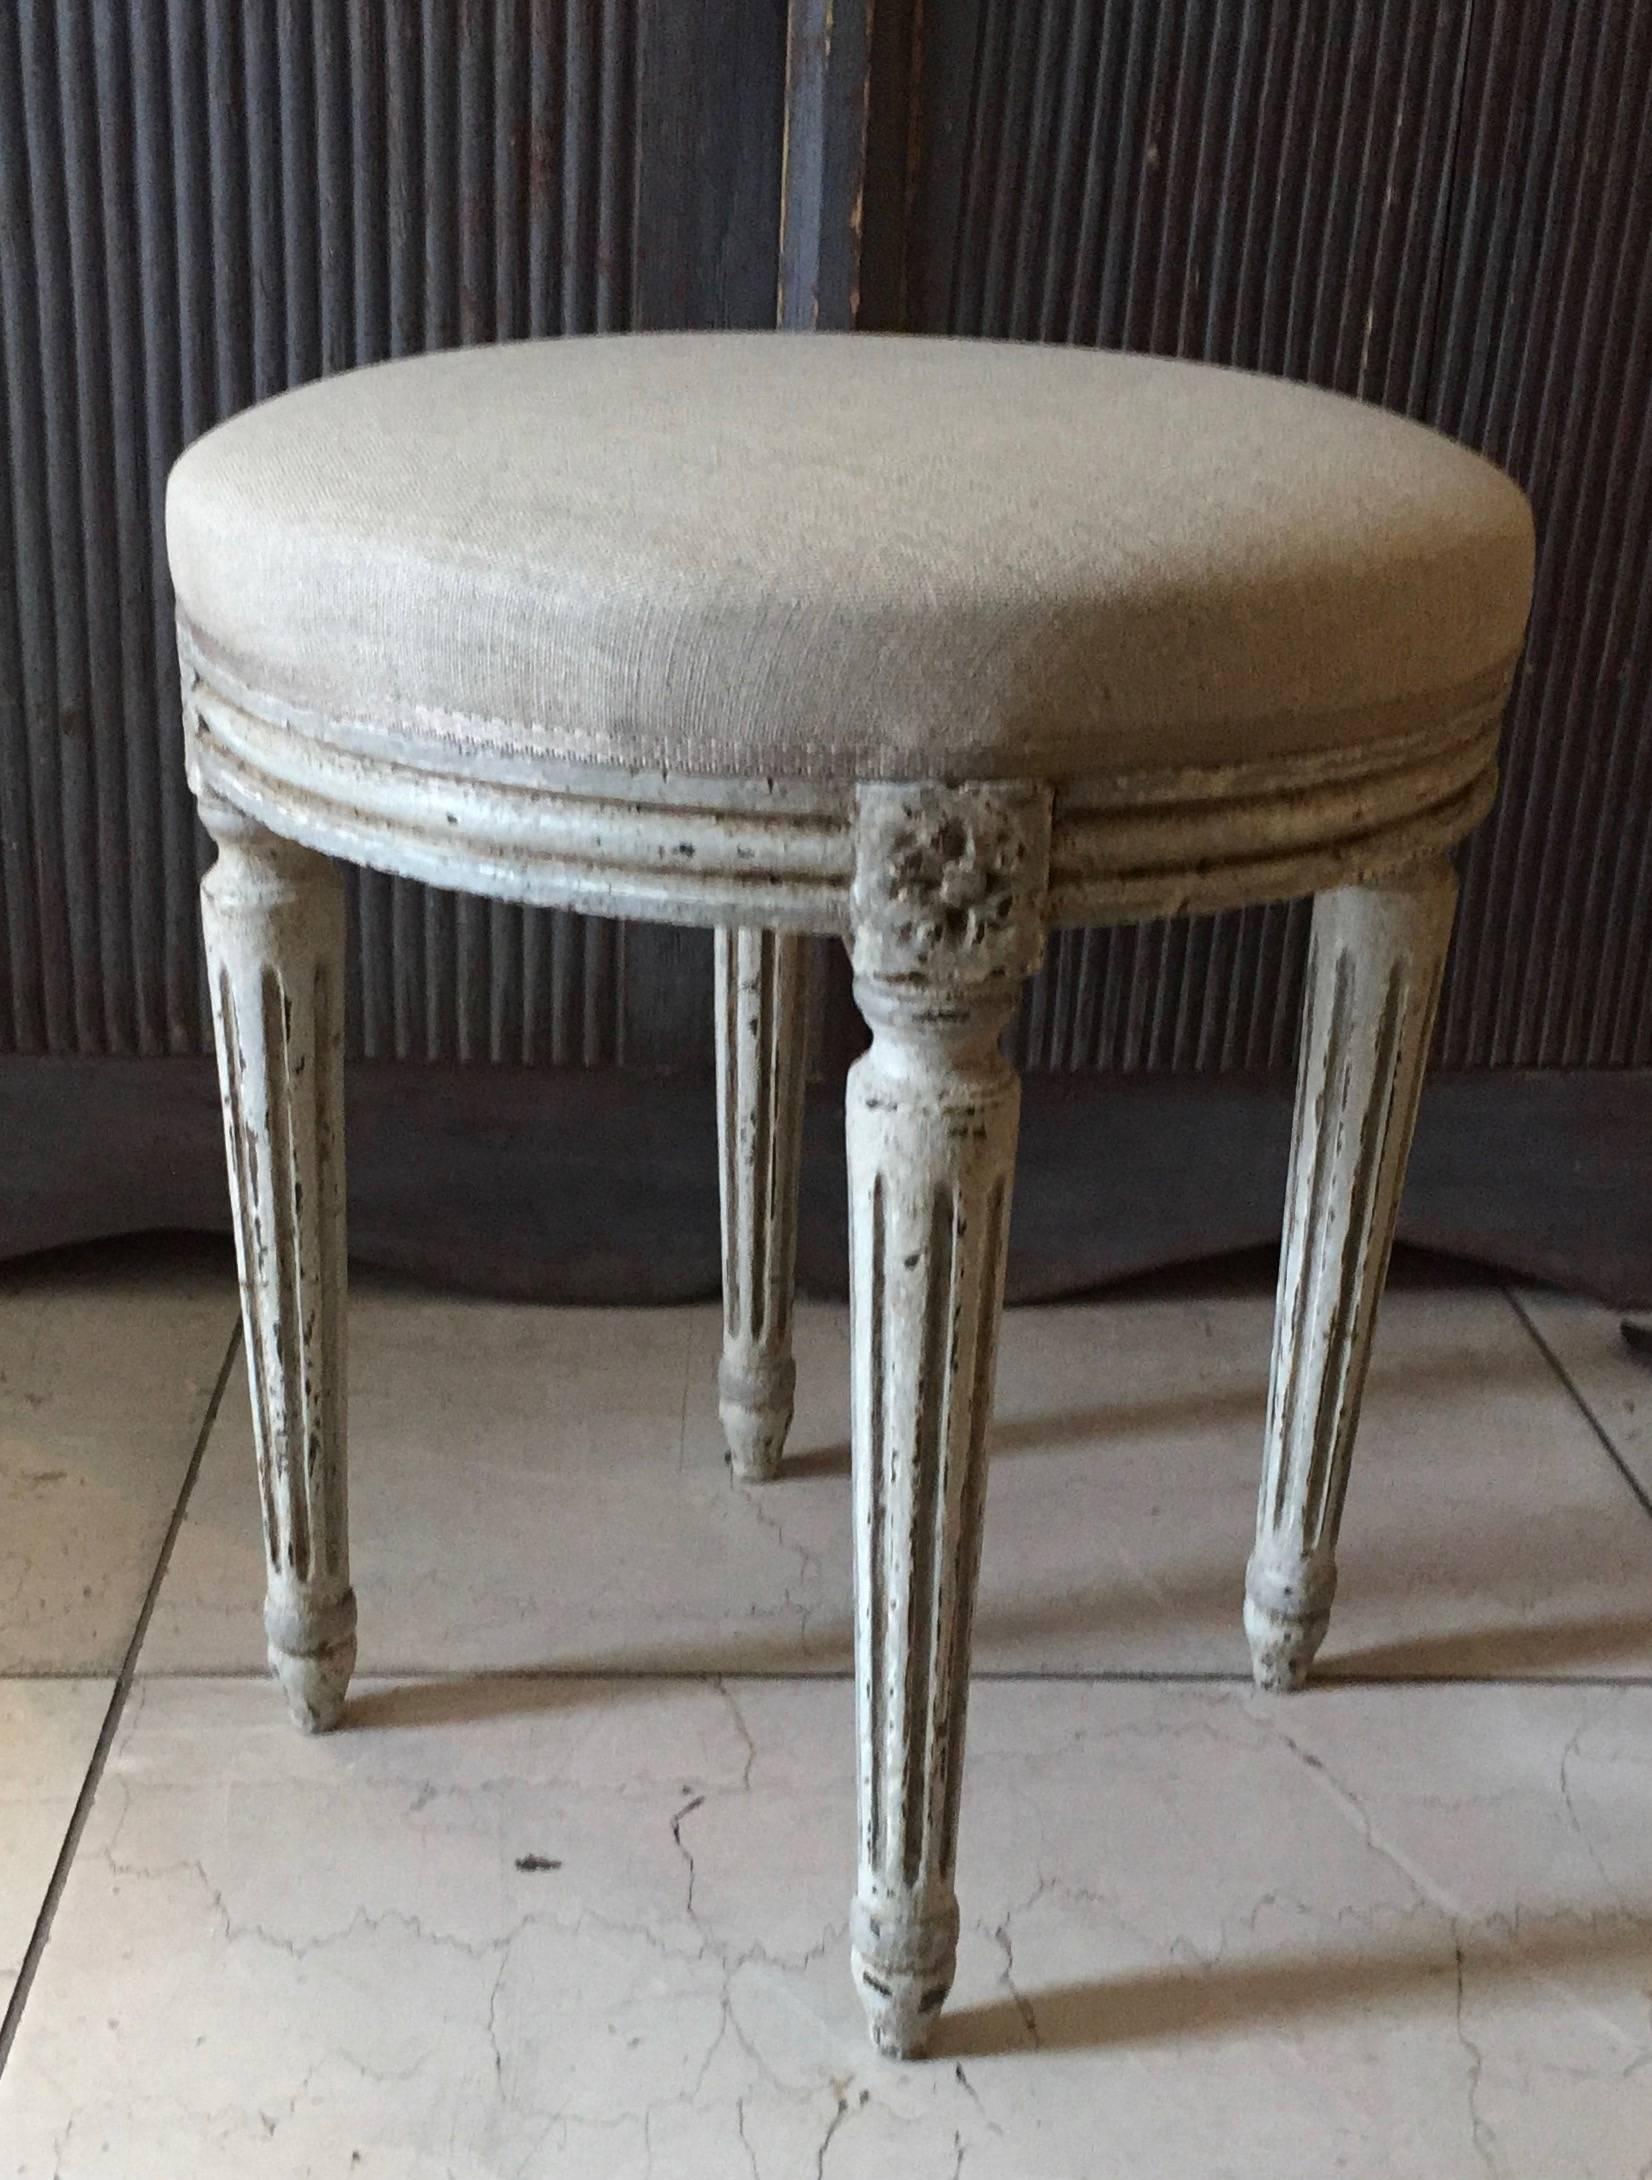 A charming, round in shape, Louis XVI style stool in lovely gray/light blue with legs tapered with flutings and joining dies decorated with a classical daisy motifs. Upholstered in linen fabric, France, circa 1900.
More than ever, we selected the